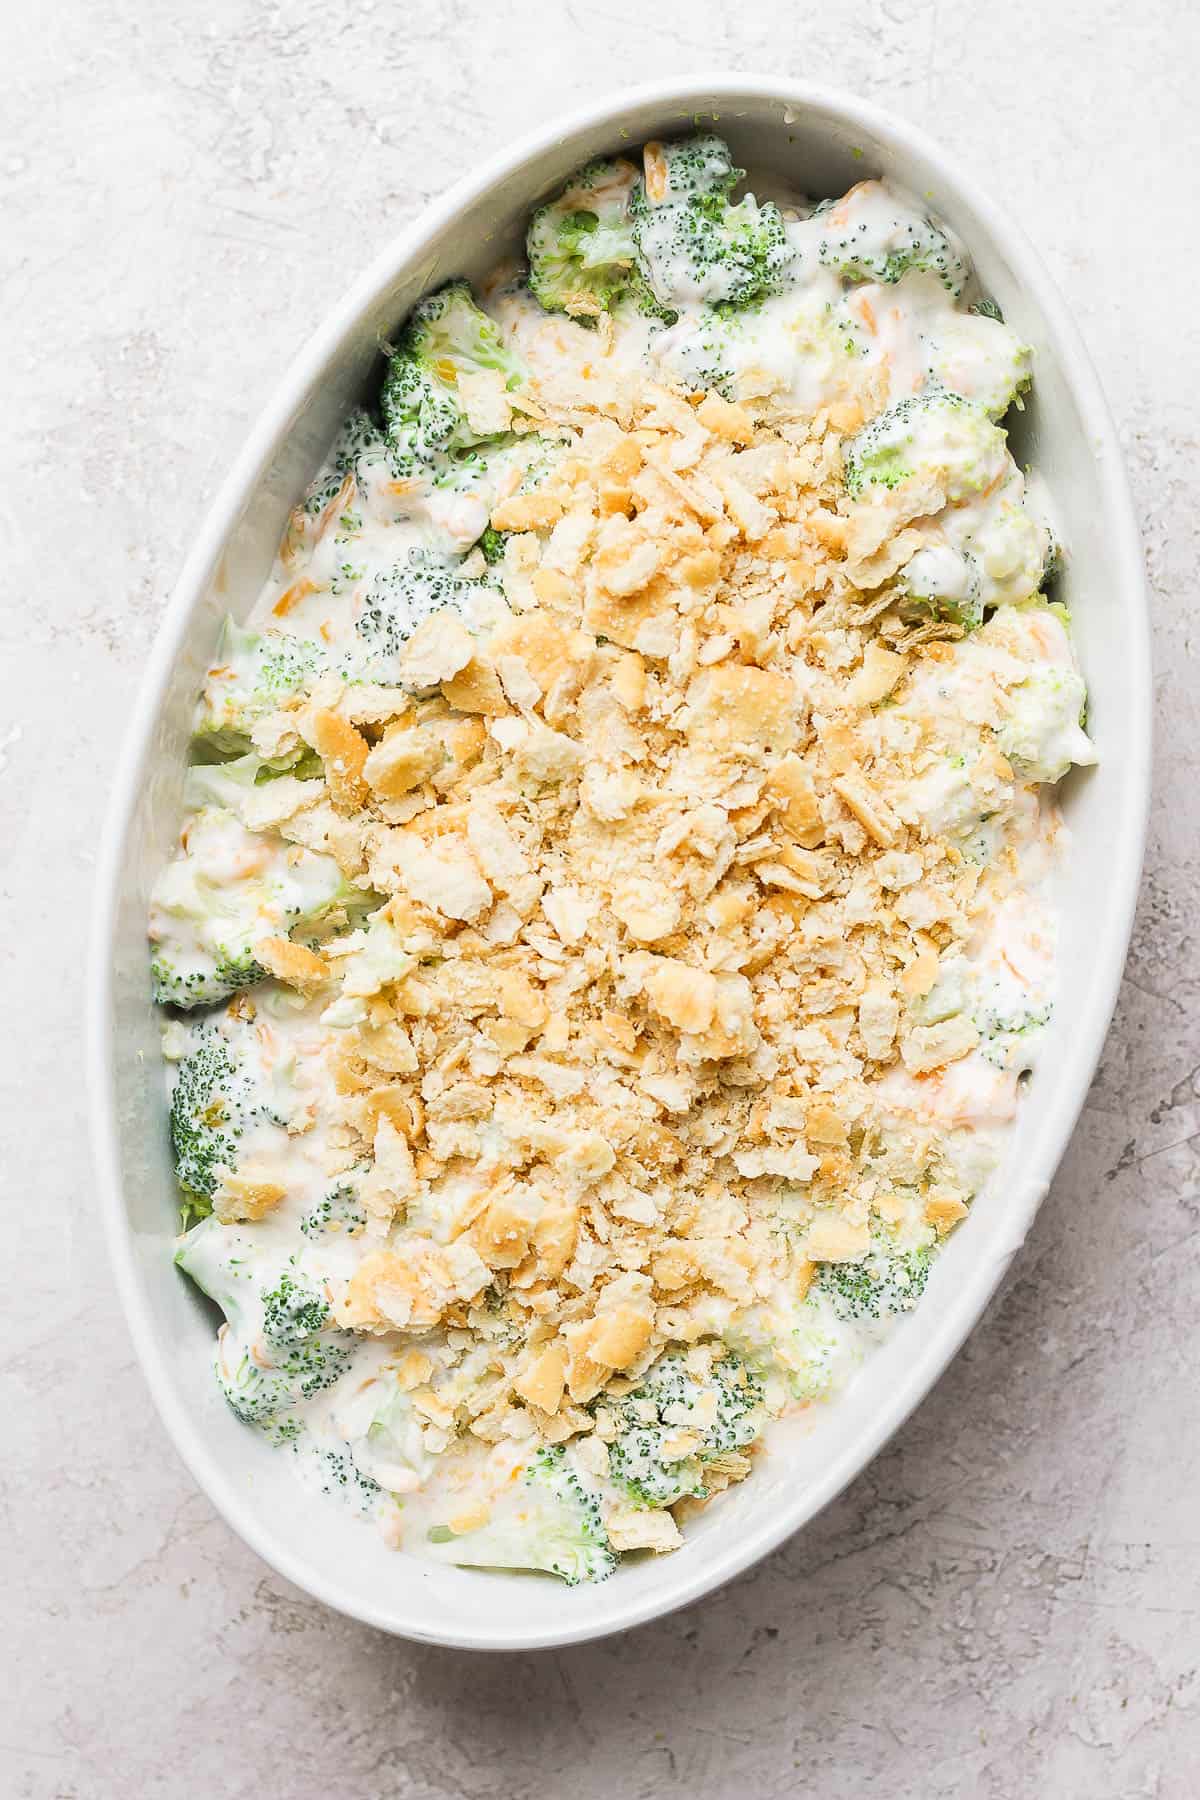 The broccoli cream mixture topped with crushed up Ritz crackers. 